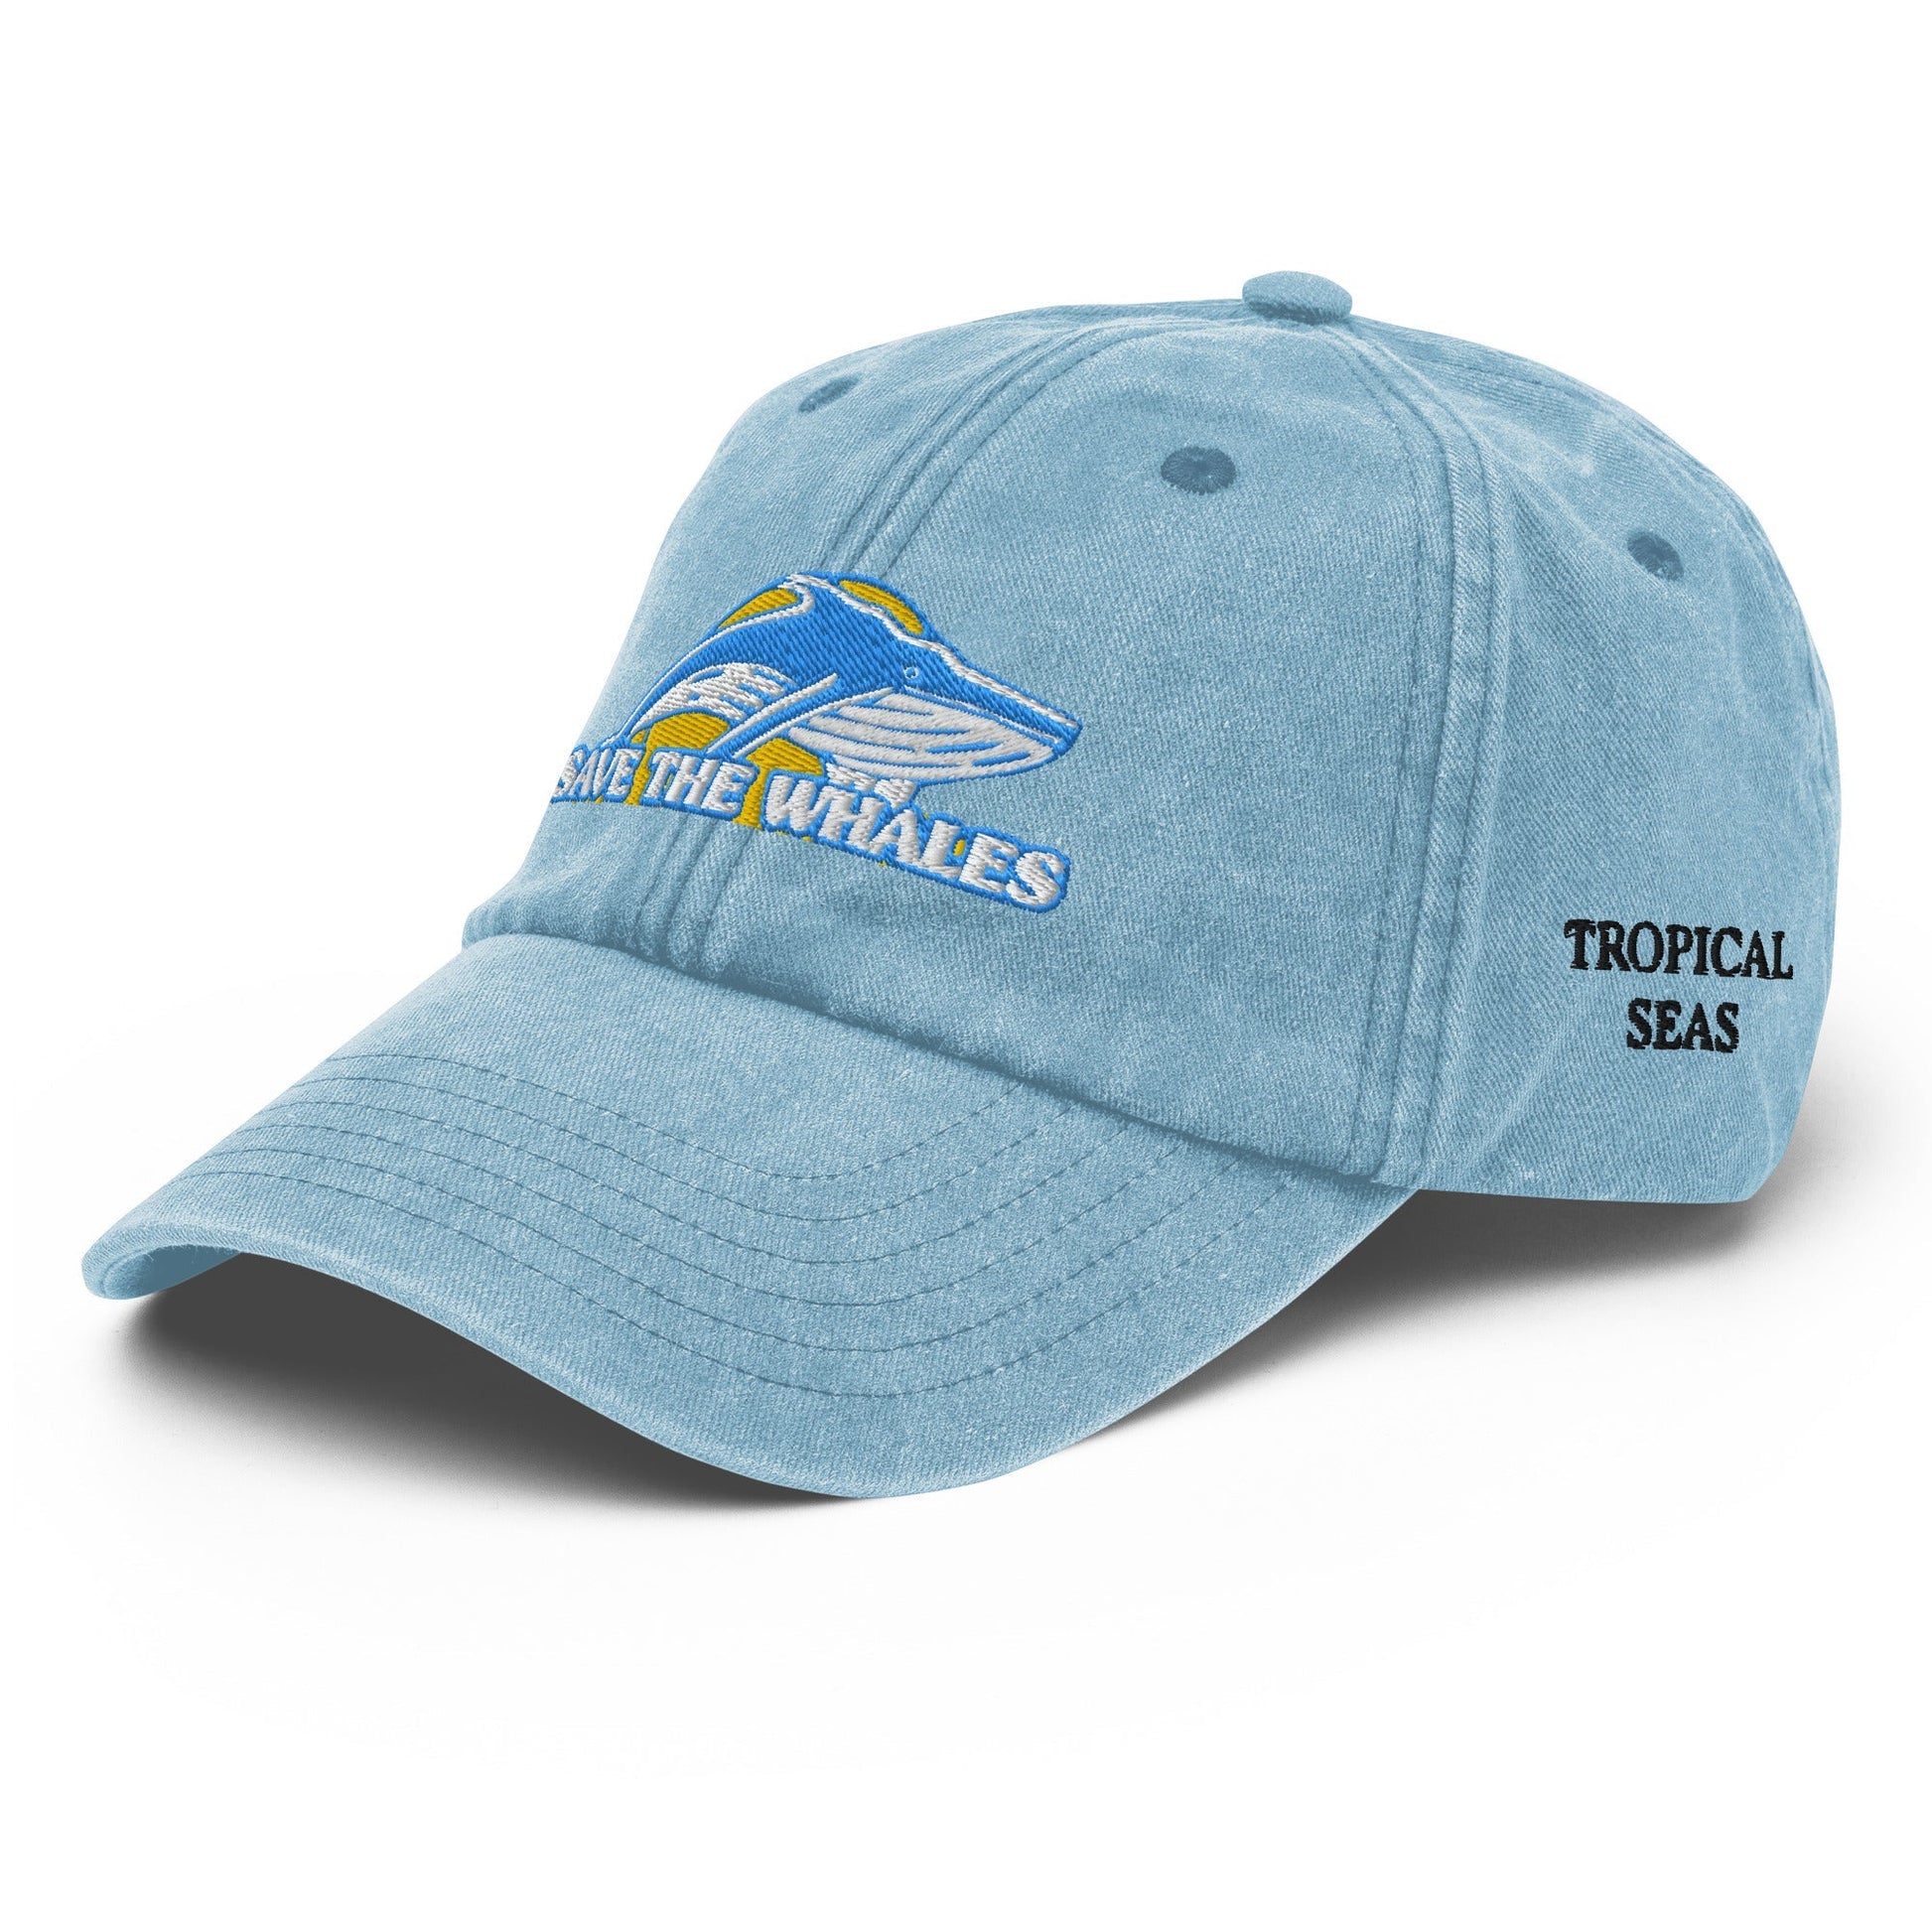 Vintage Save the Whales Hat - Tropical Seas Clothing 